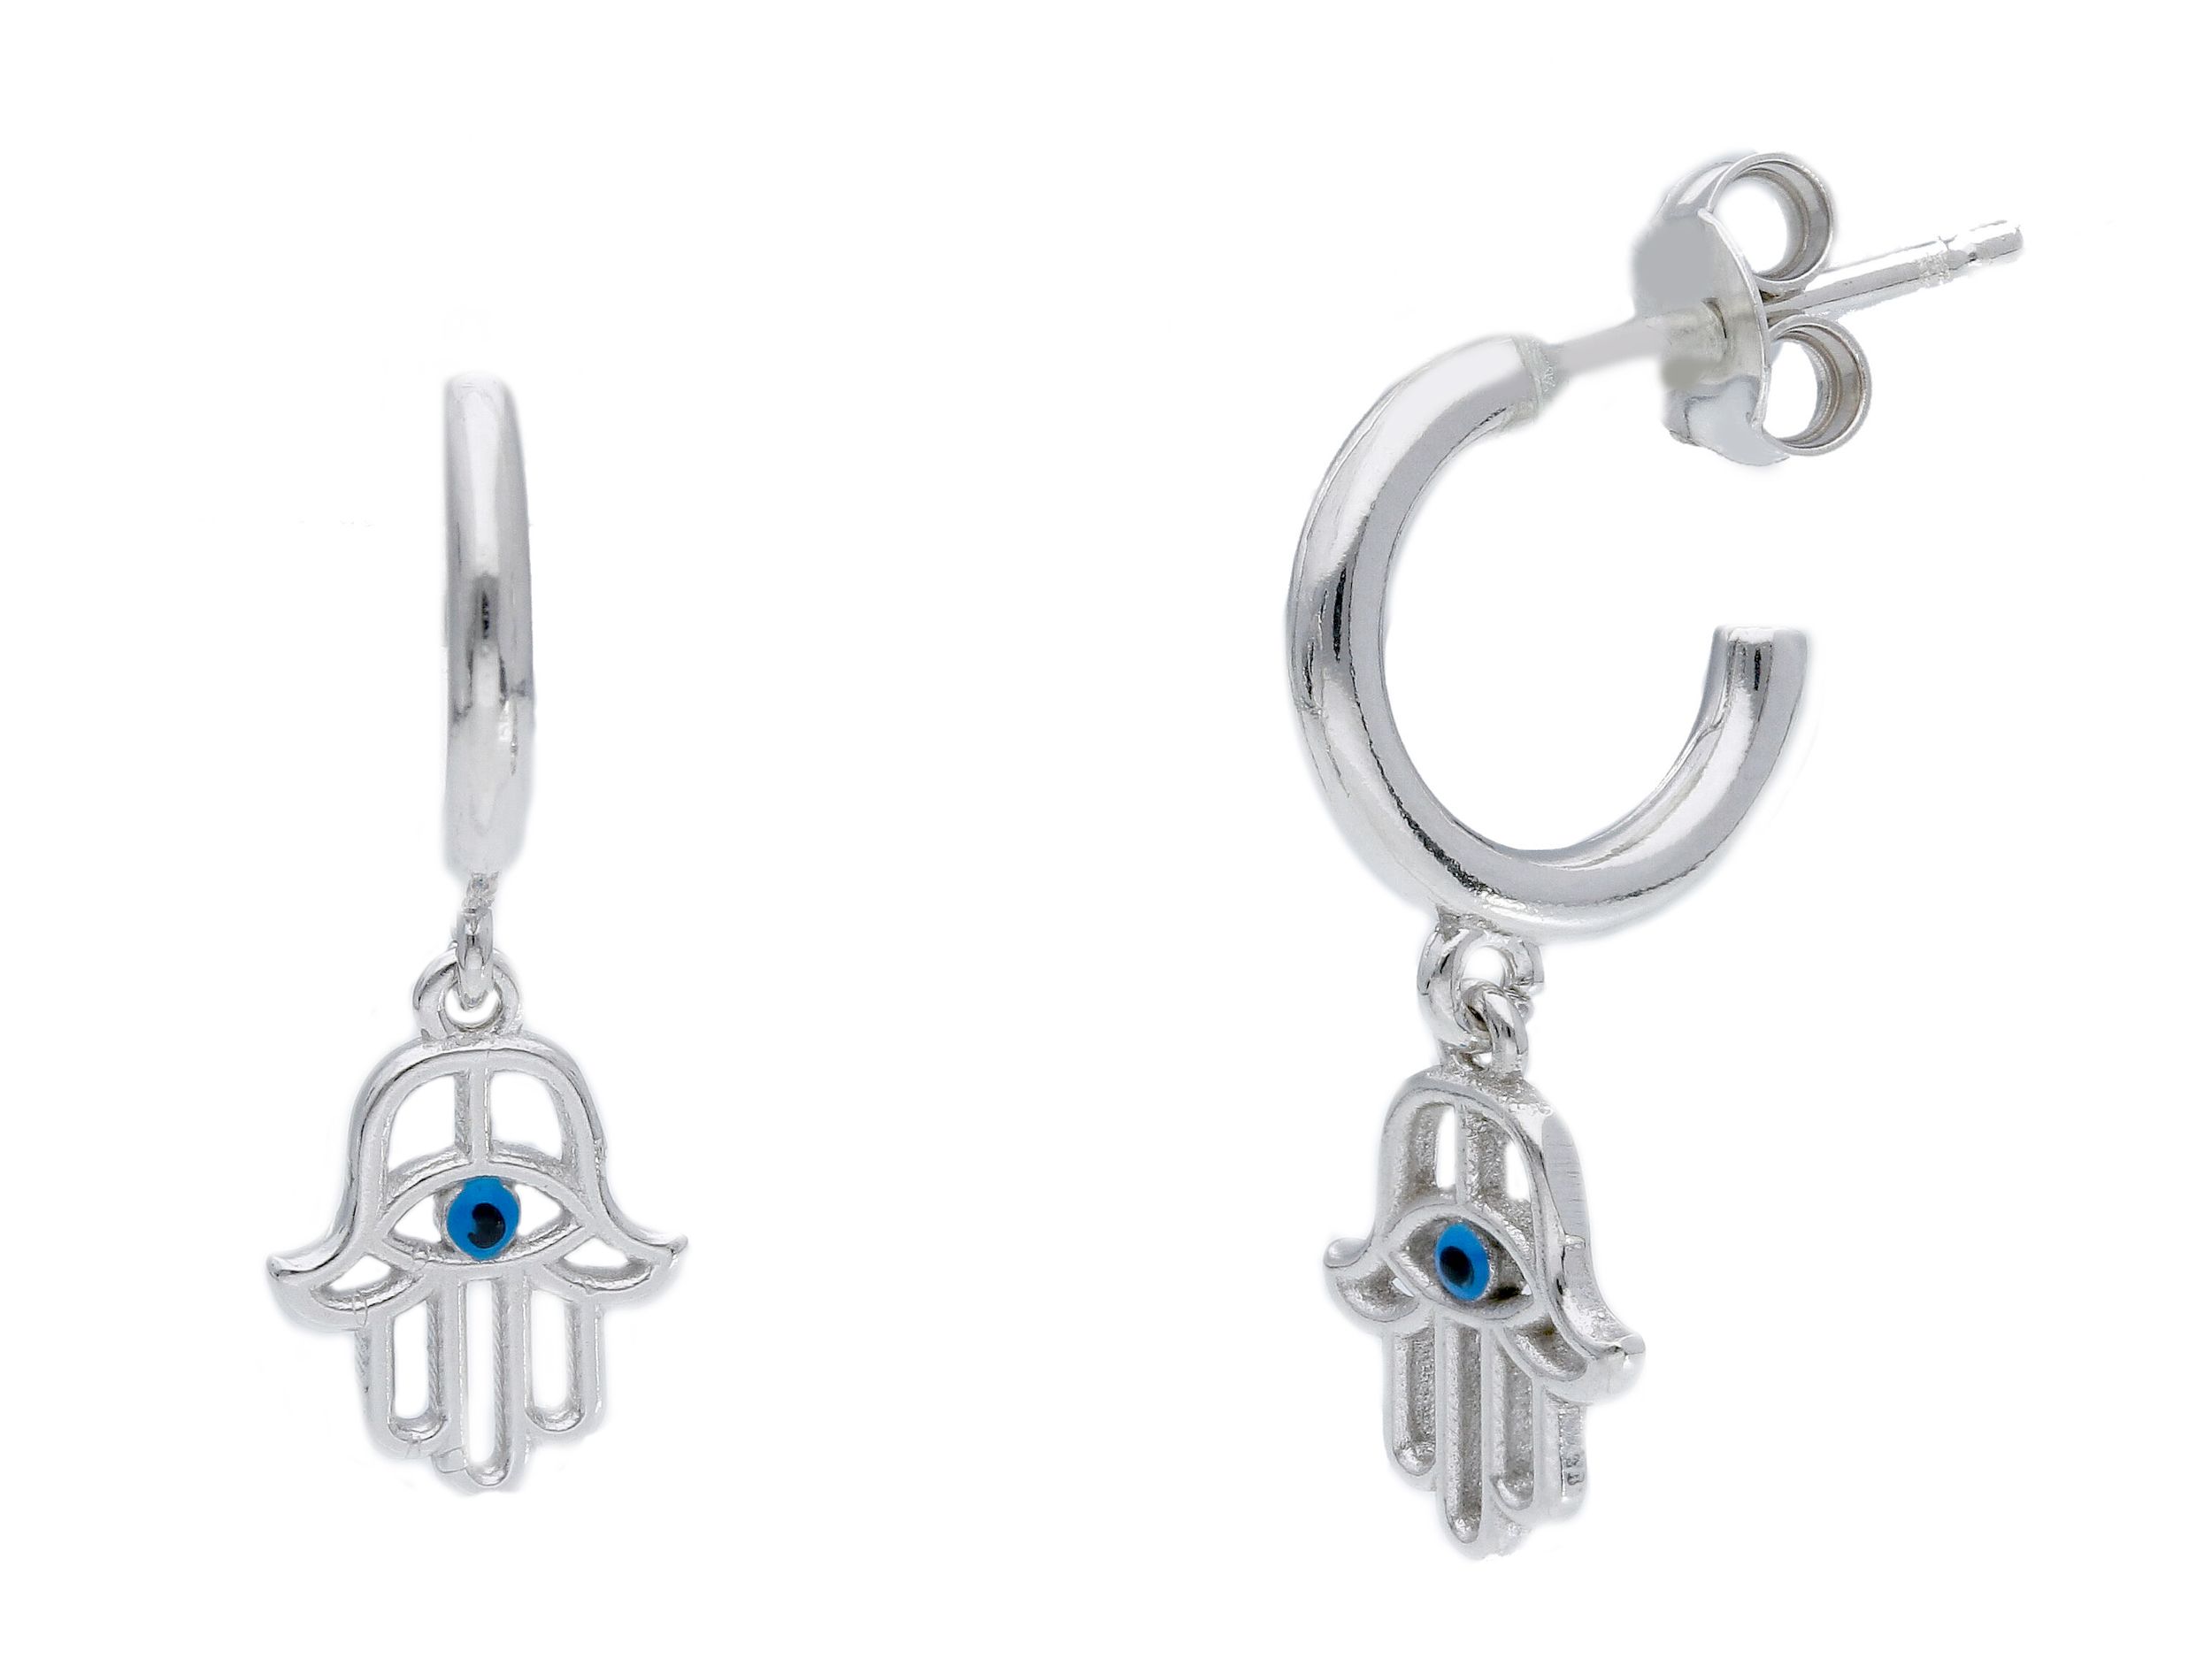  Platinum plated silver 925 FATIMA earrings (code S256340)